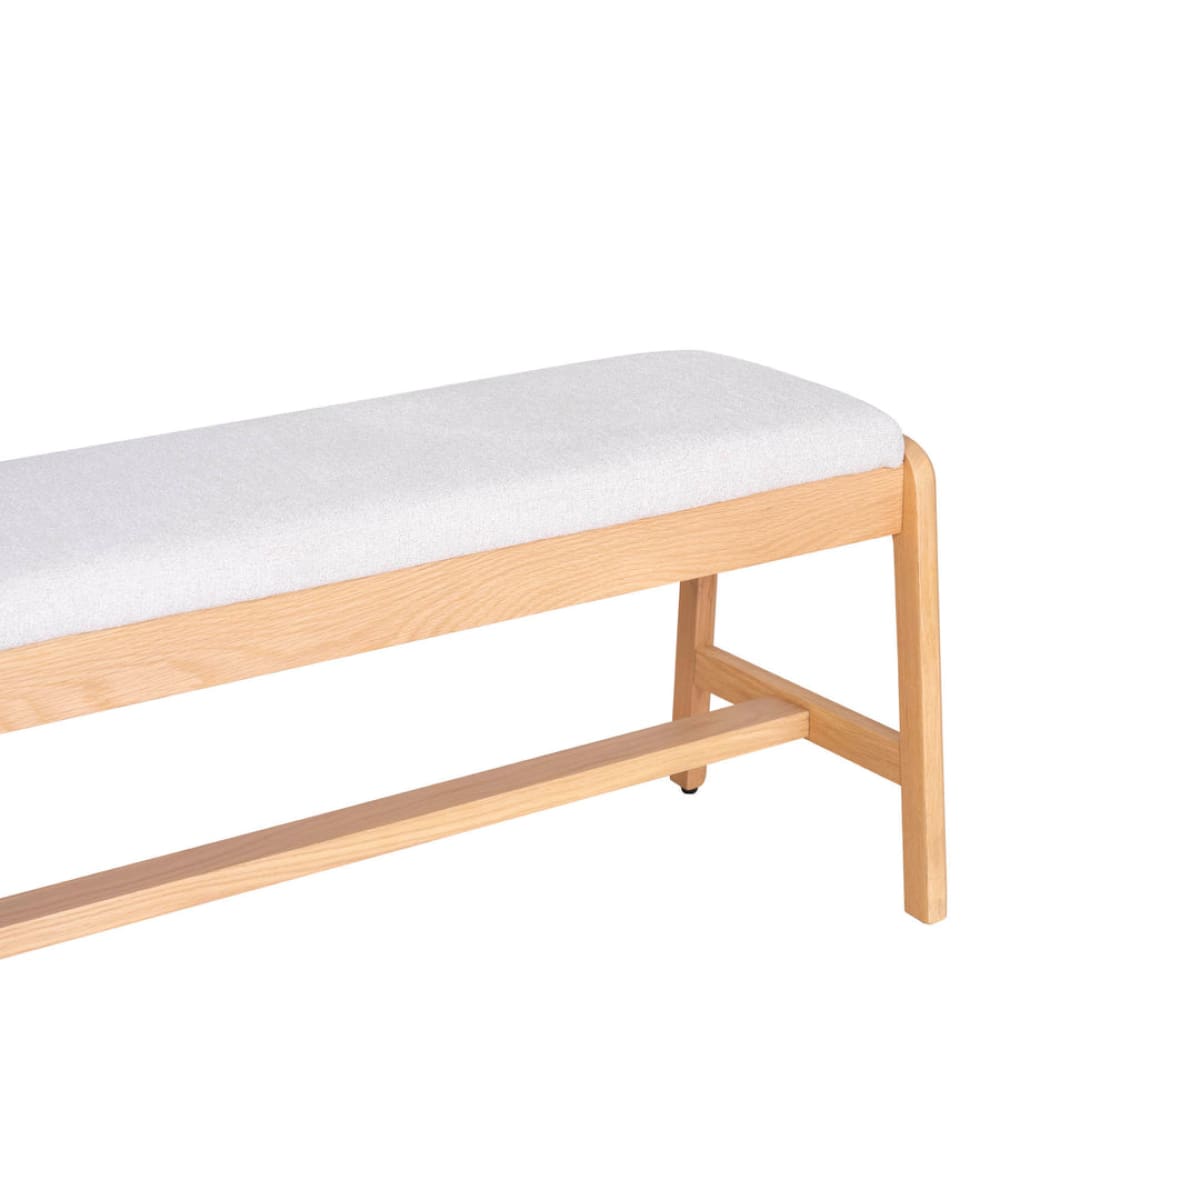 Arizona Dining Bench - Oatmeal - lh-import-dining-benches